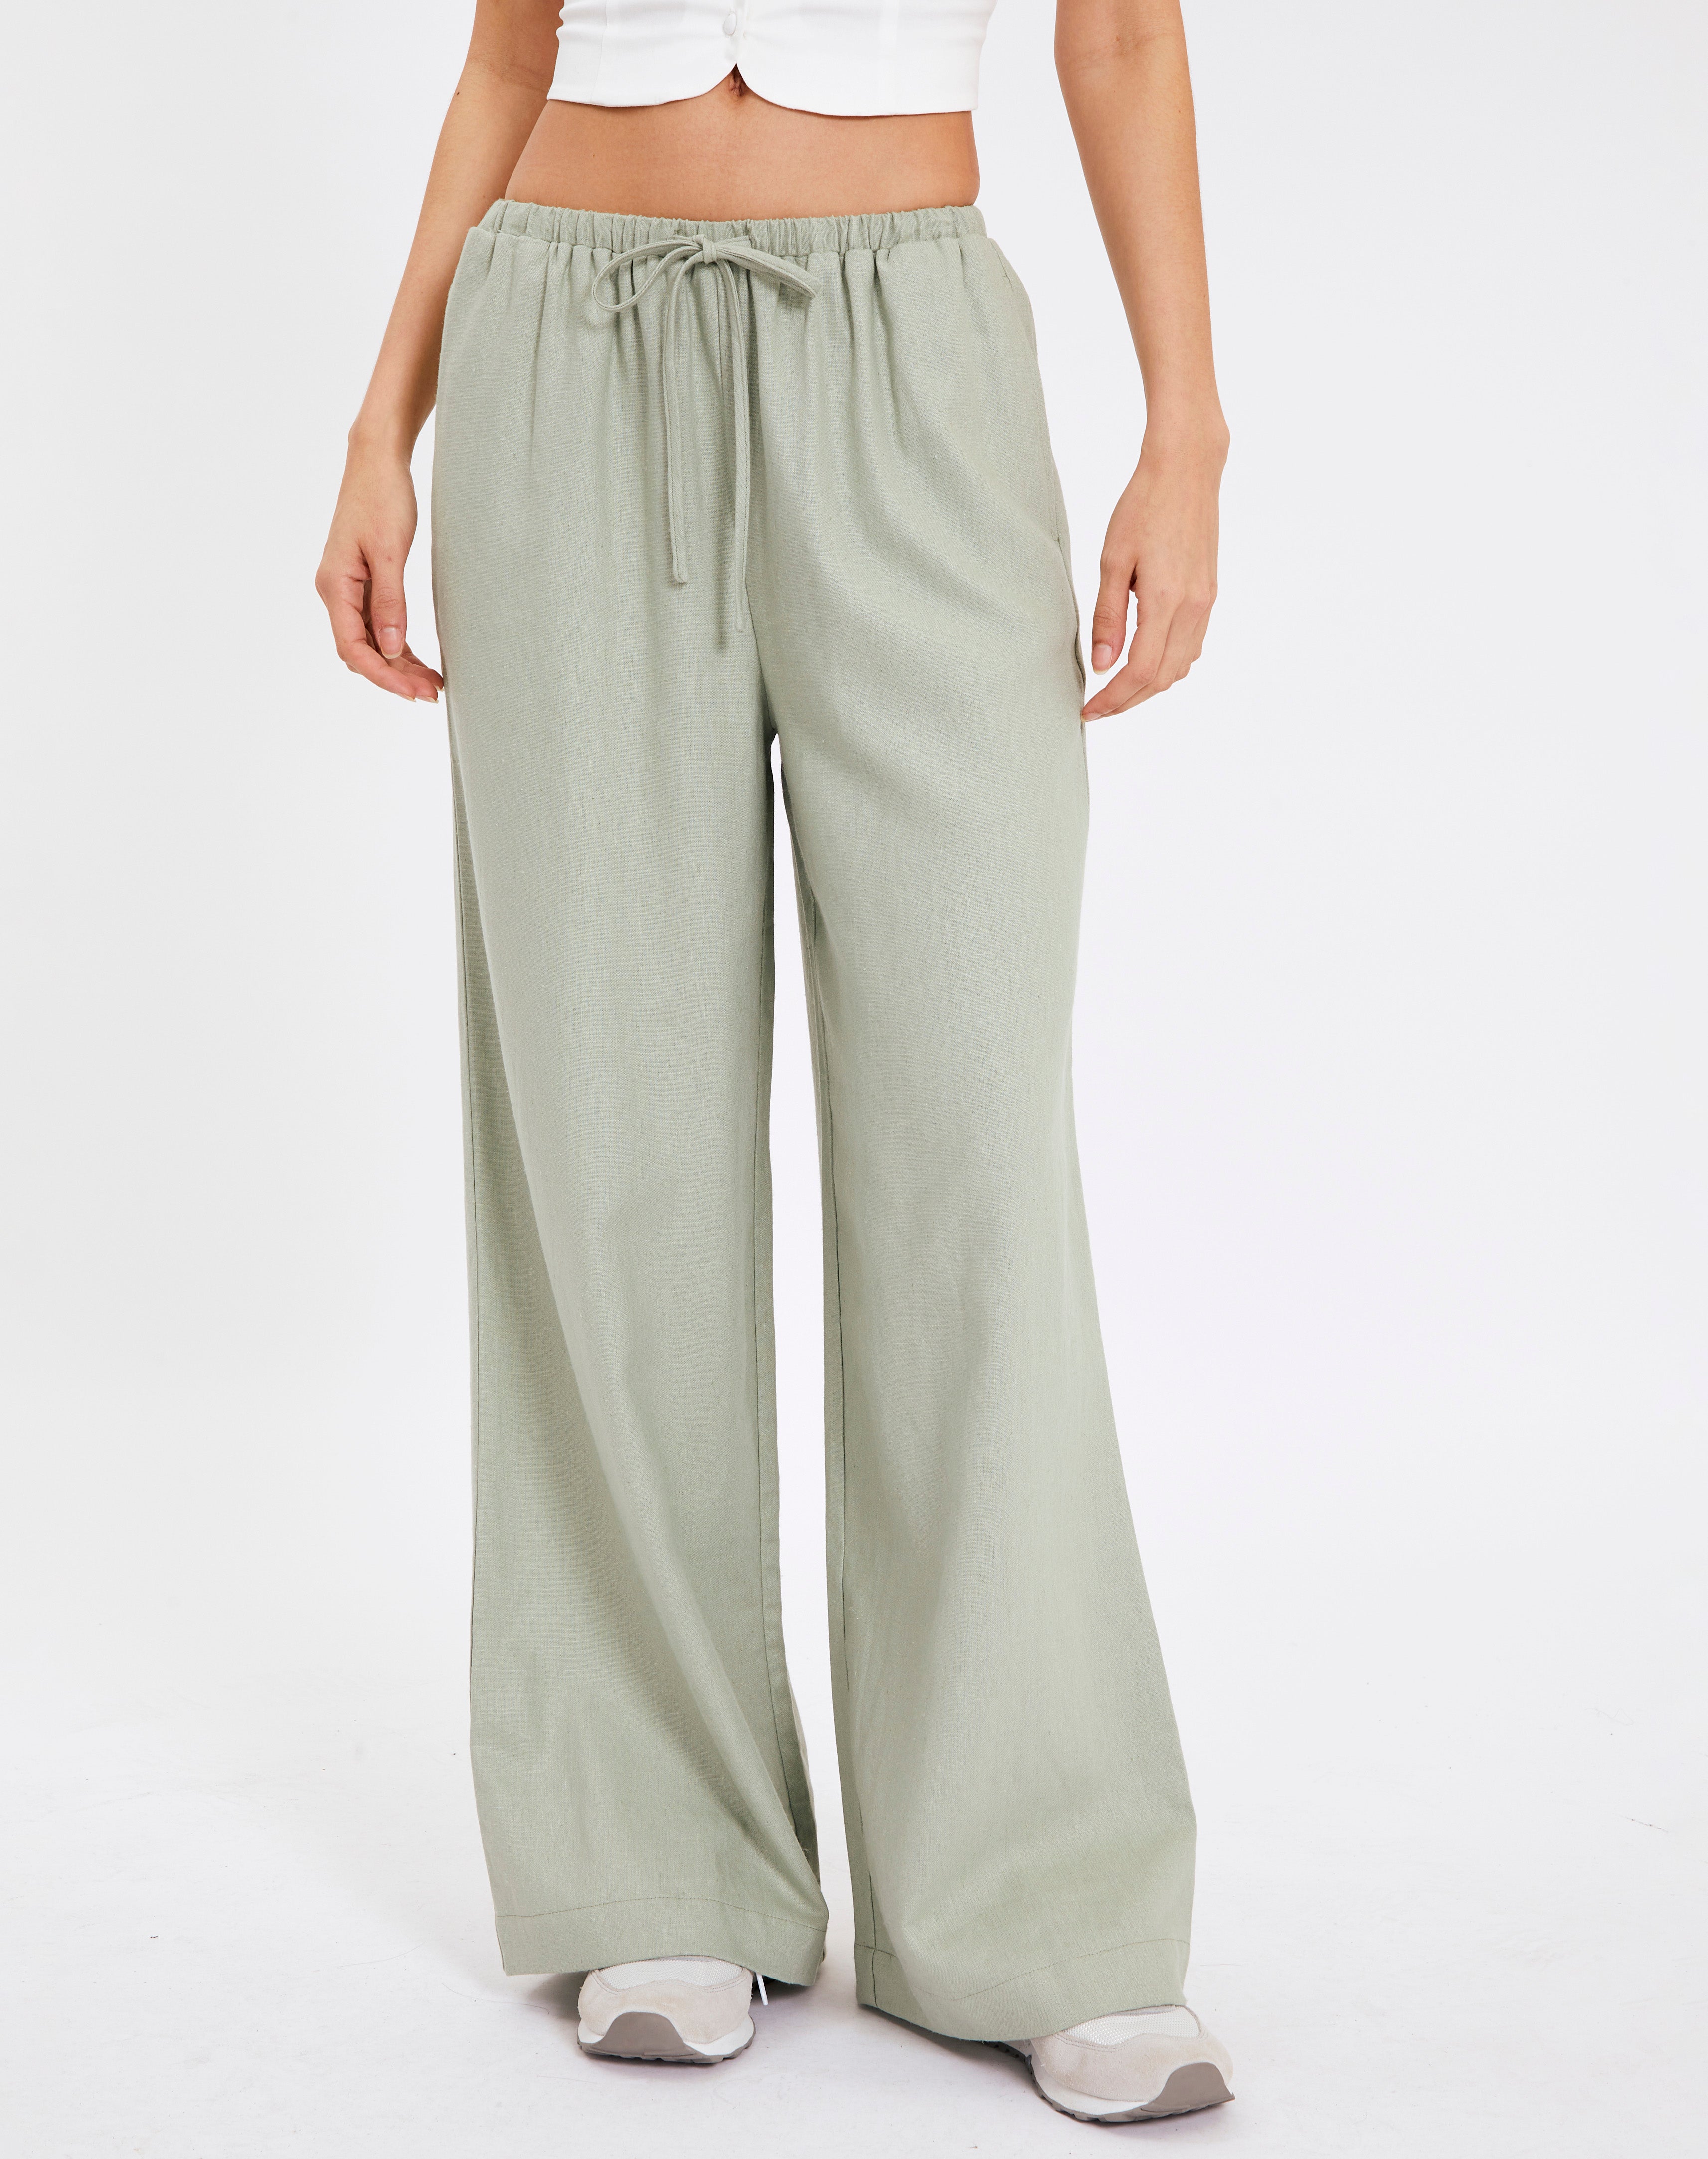 Traceable Linen Blend Drawstring Pant in Green | Glassons